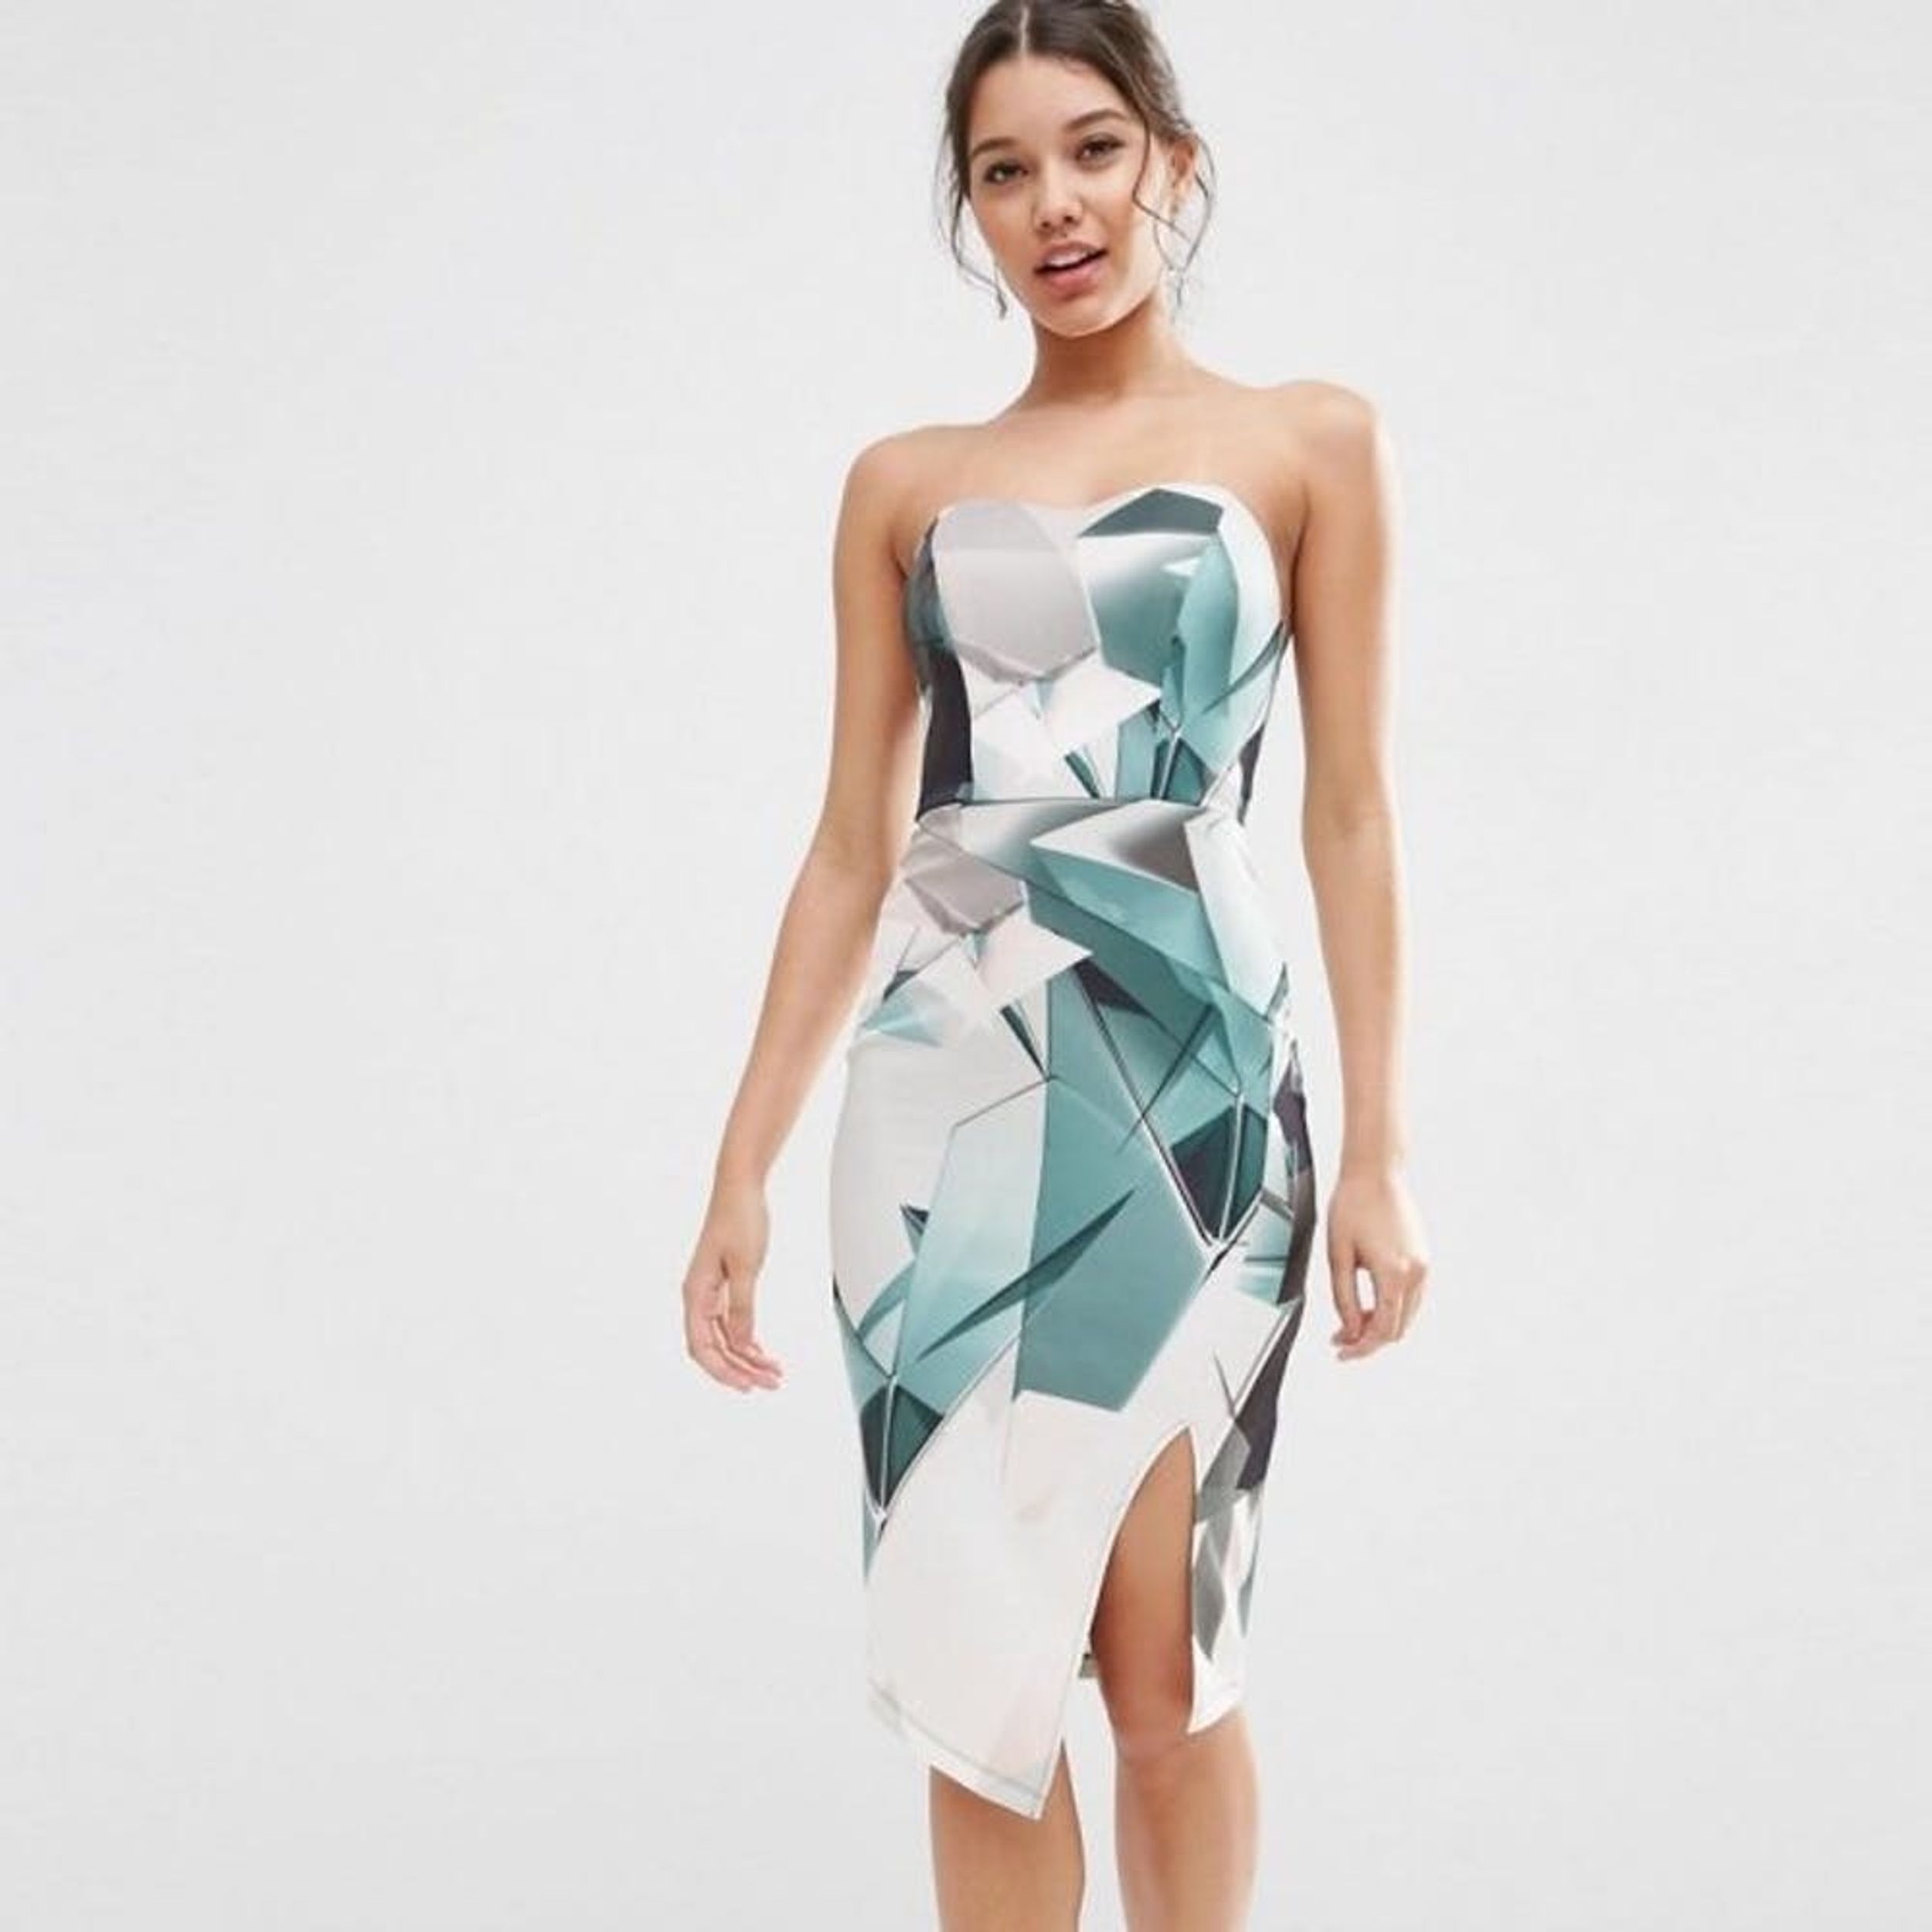 17 Bodycon Dresses You Could *Totally* Wear to a Summer Wedding